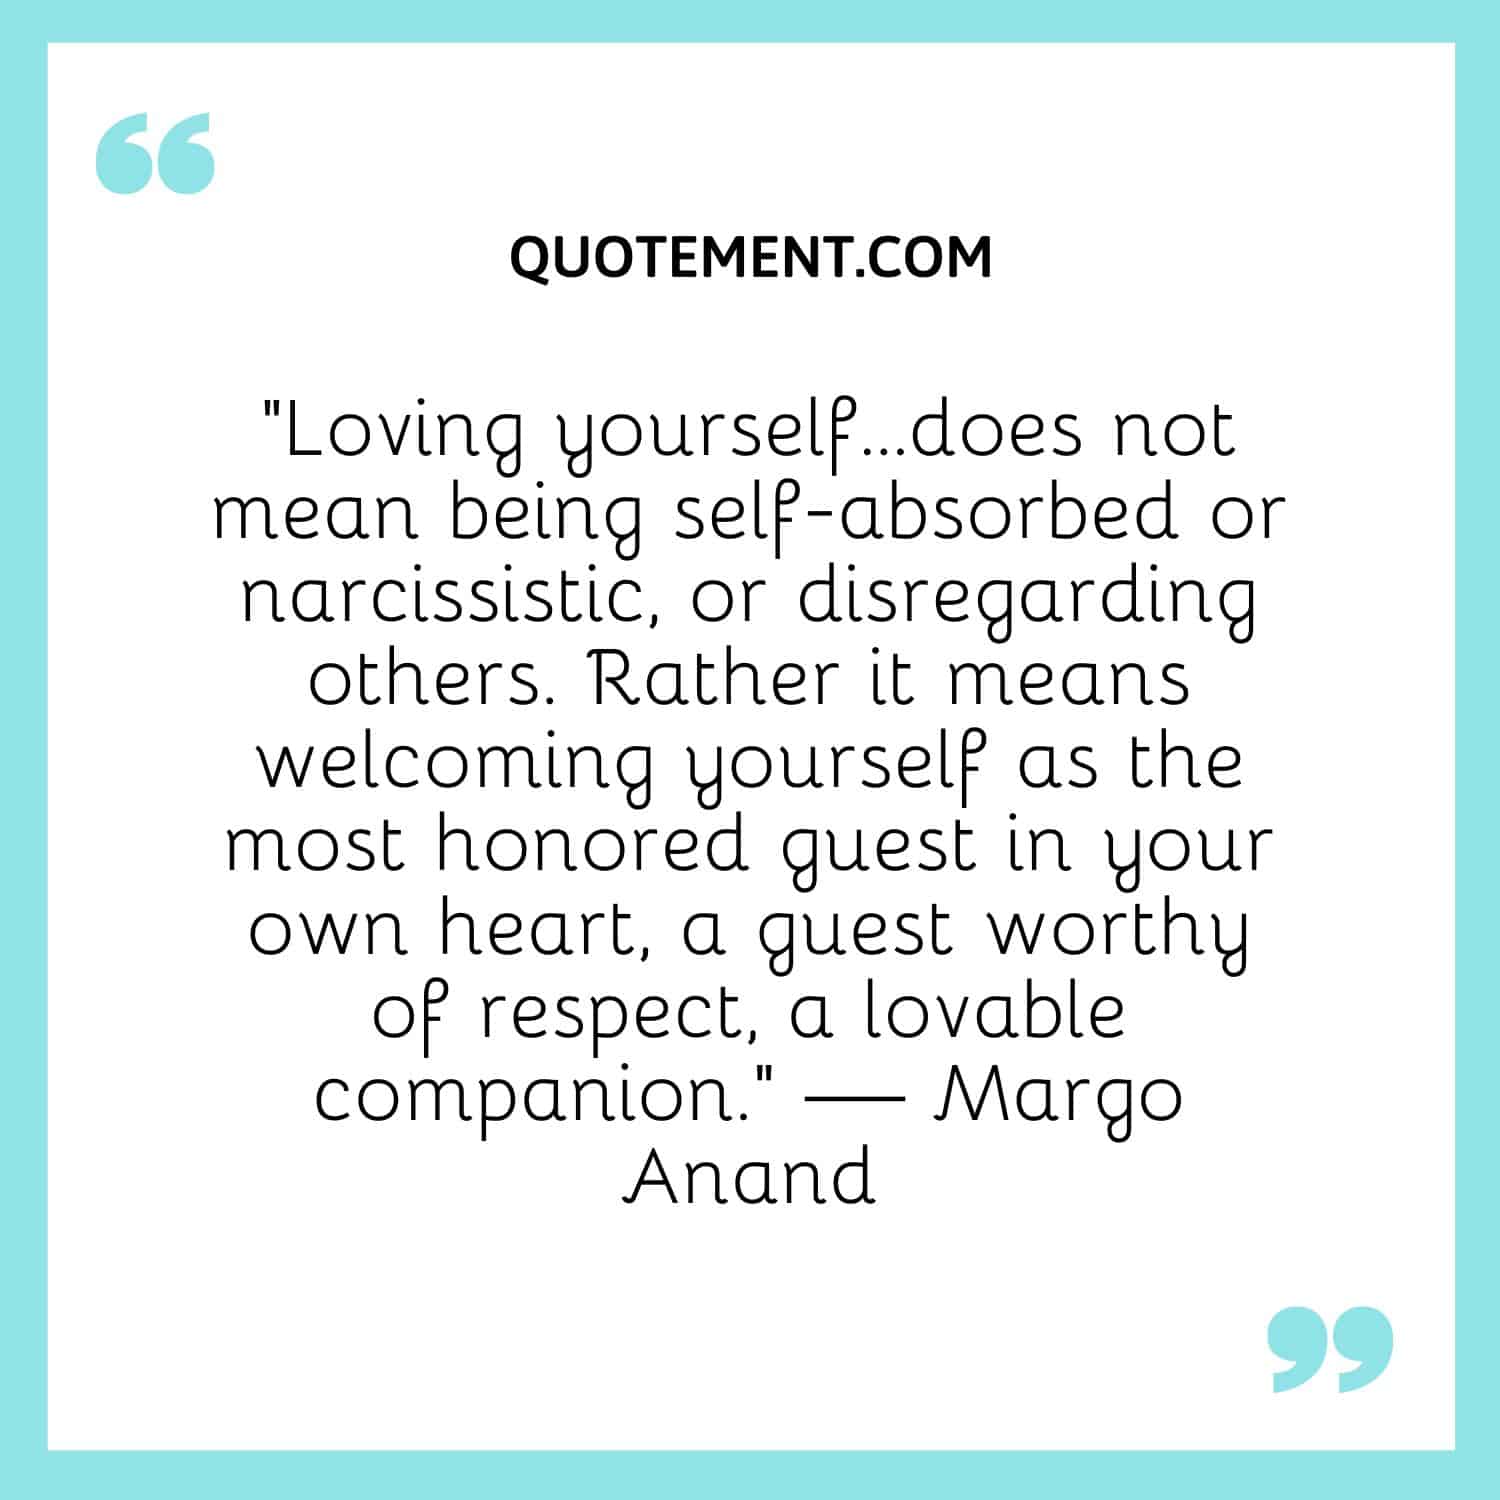 Loving yourself…does not mean being self-absorbed or narcissistic, or disregarding others.